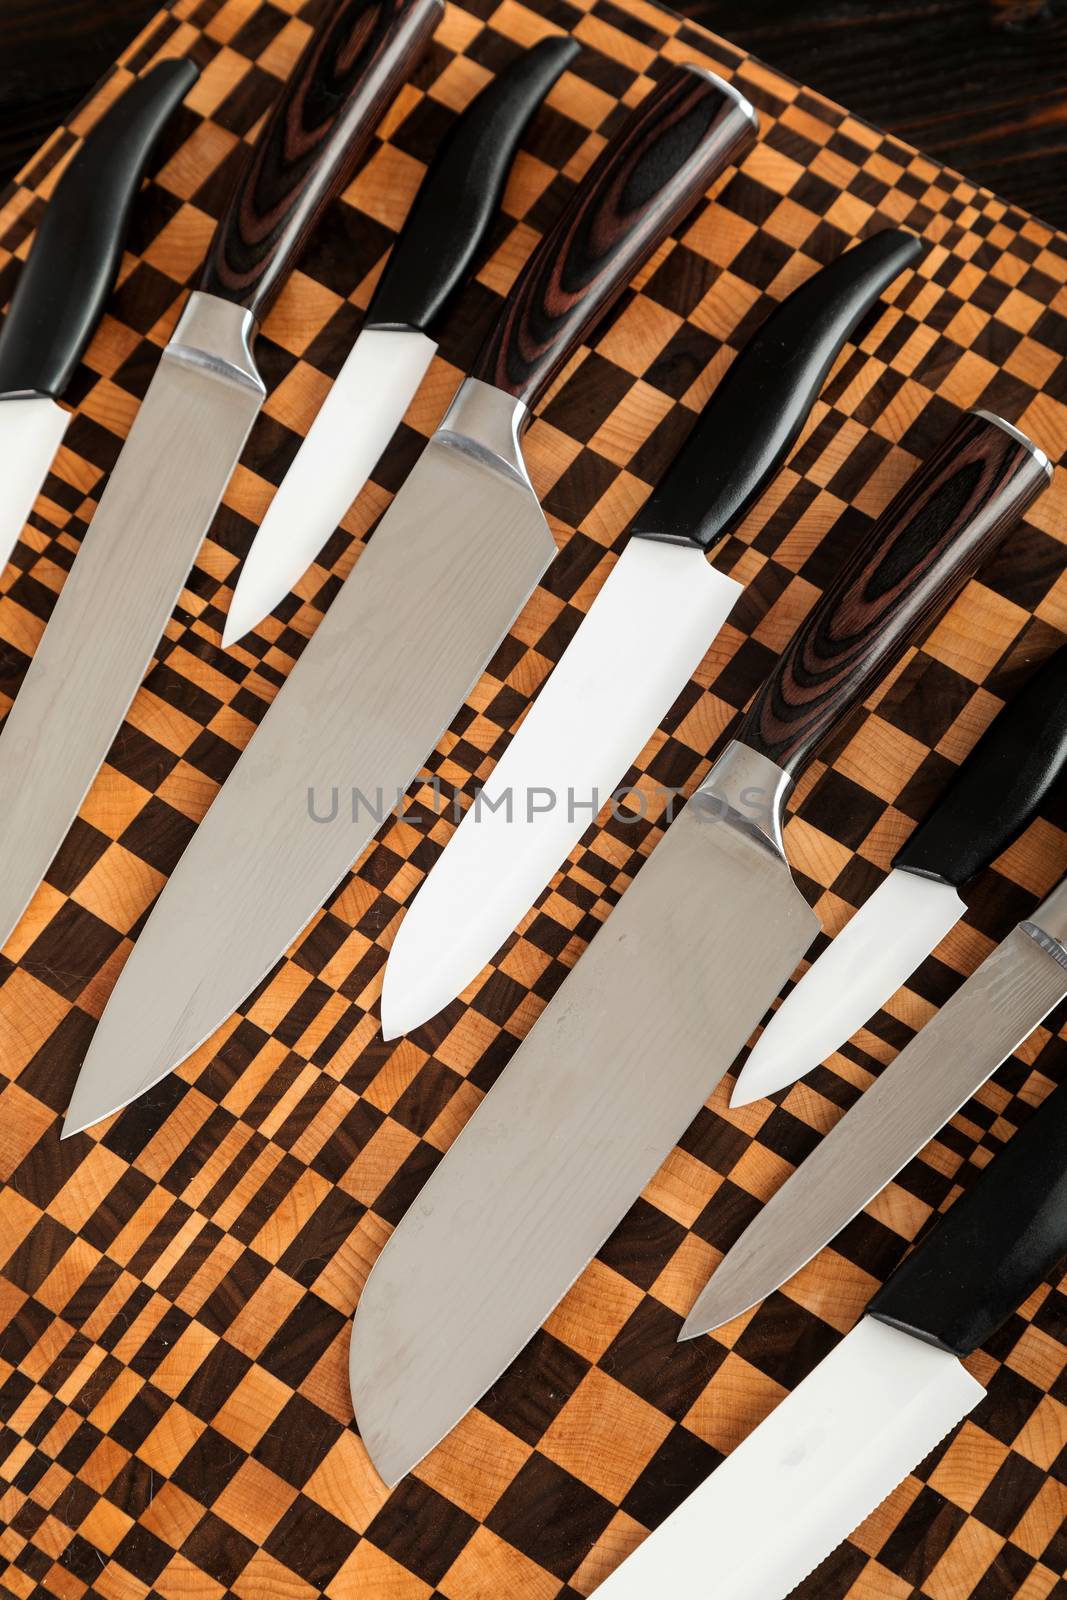 A set of high quality kitchen knives on a cutting board by sveter